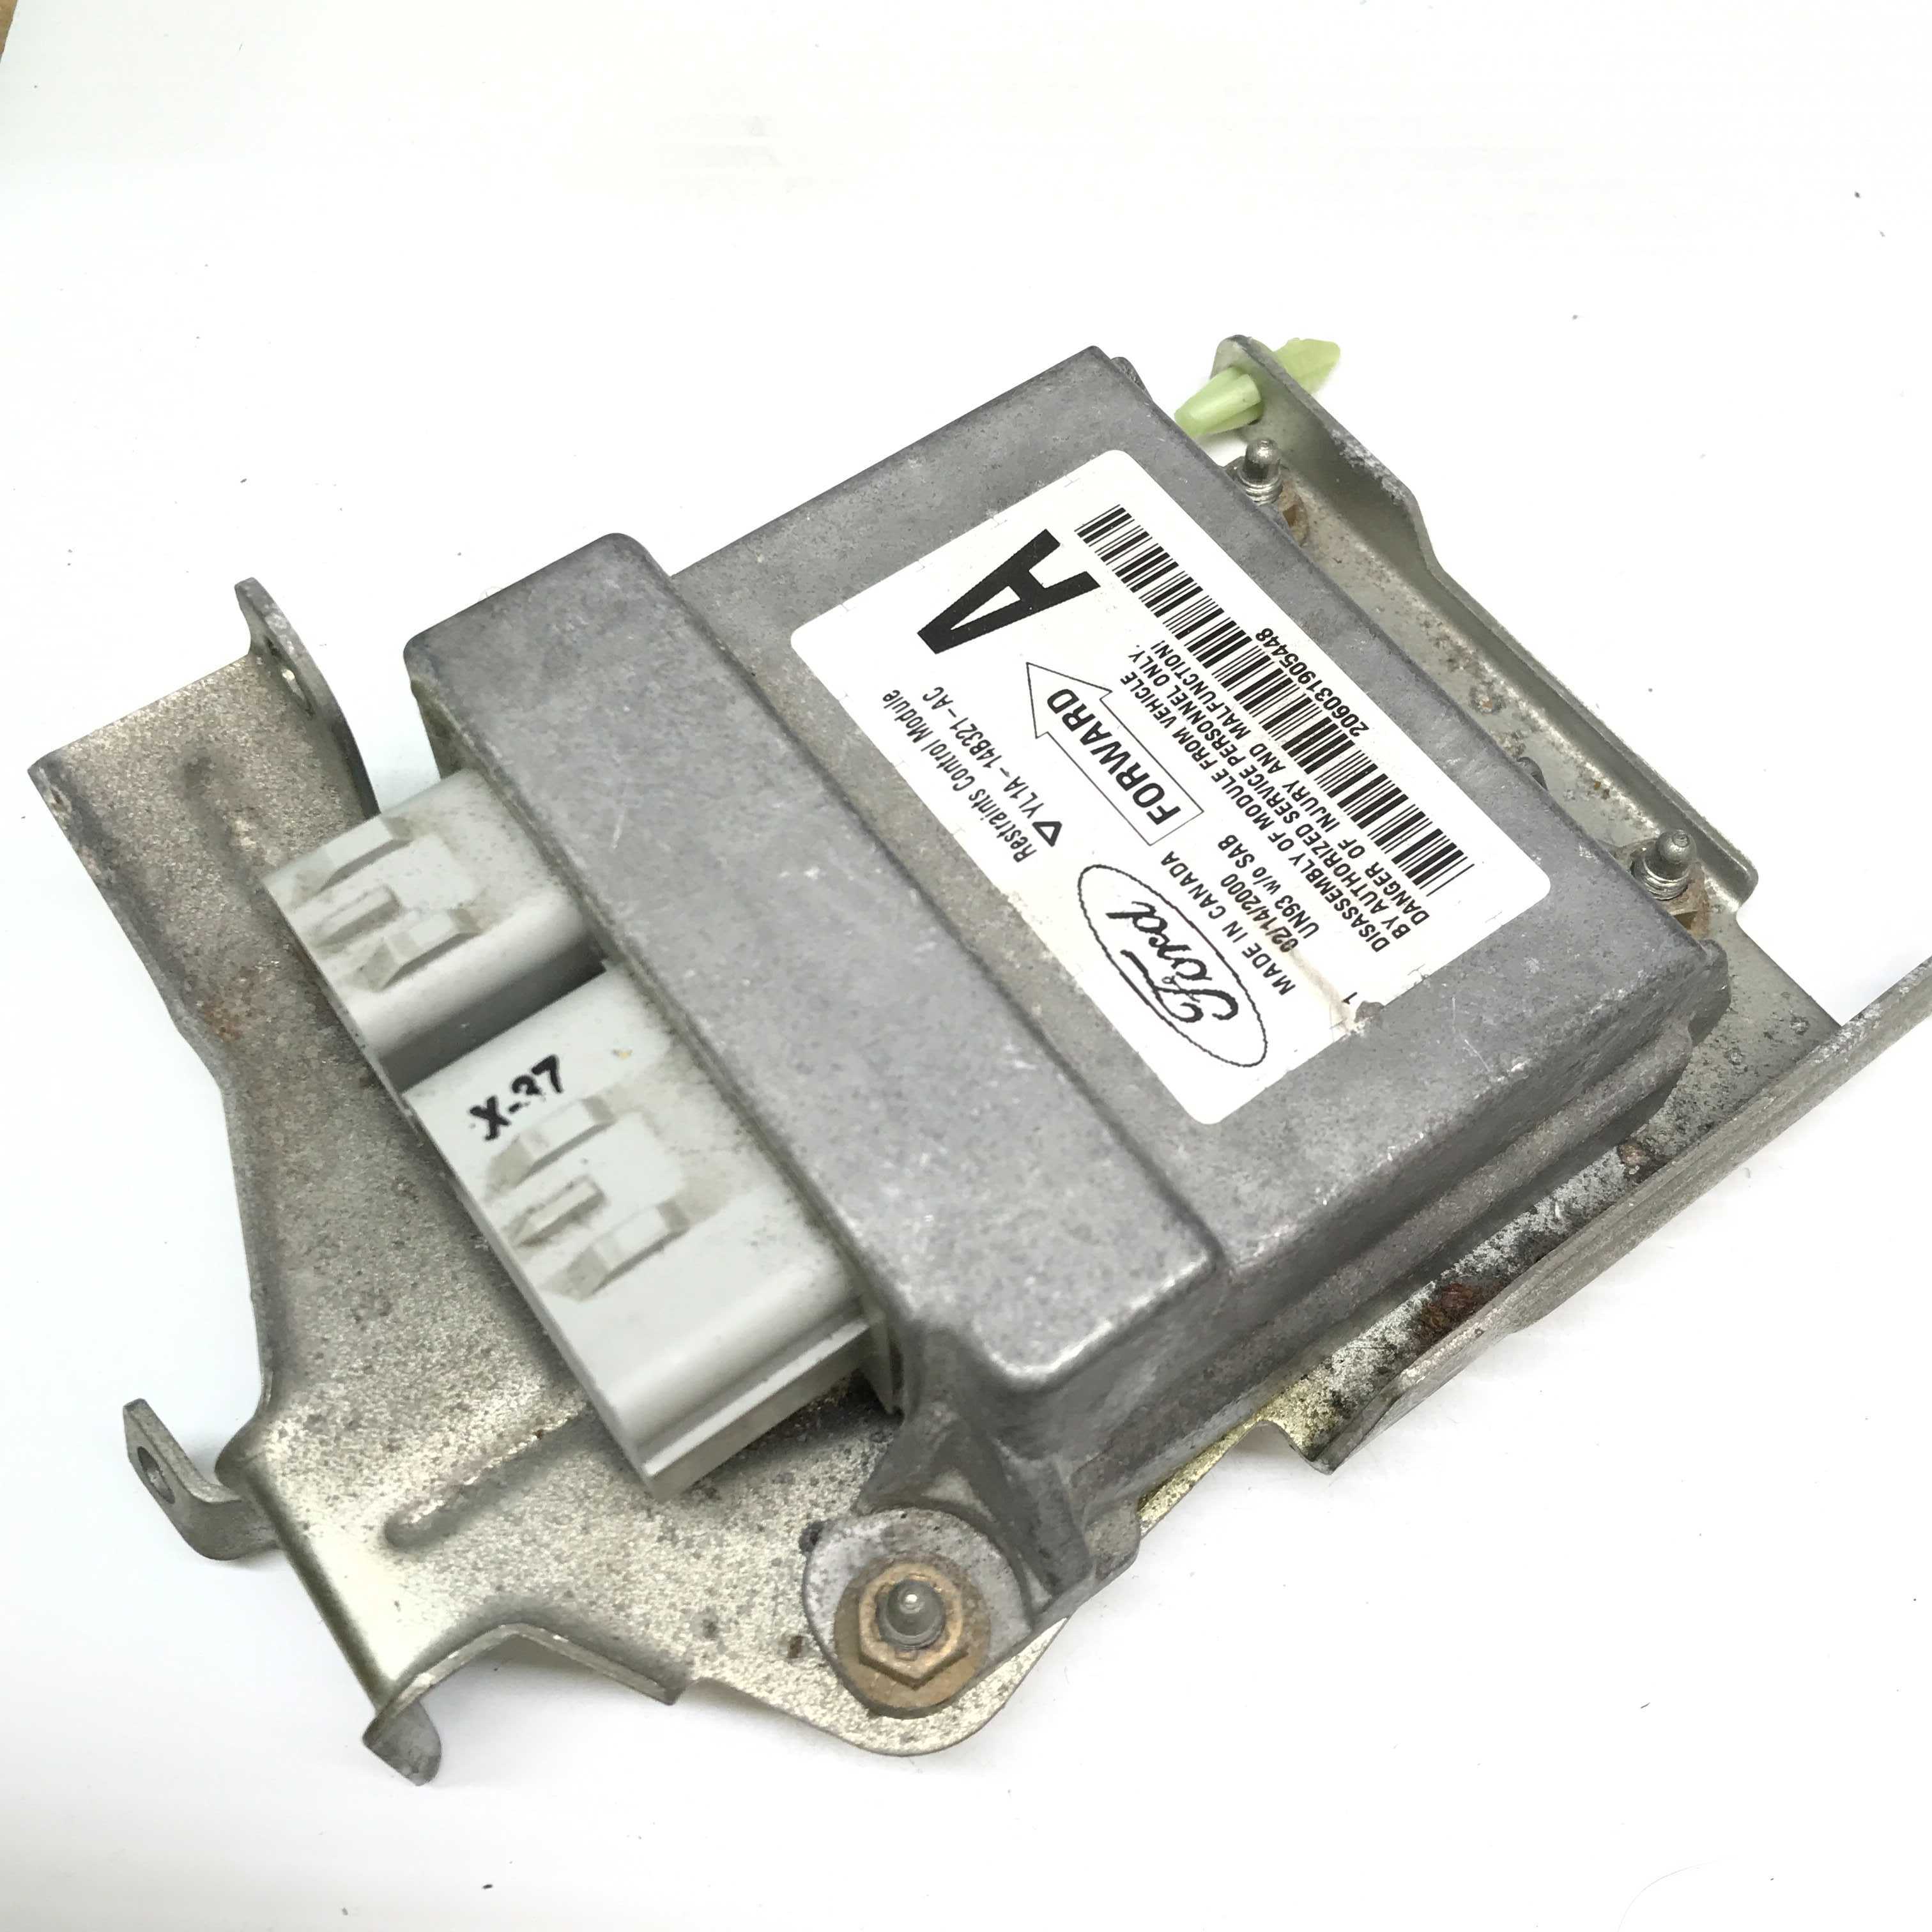 FORD EXPEDITION SRS (RCM) Restraint Control Module - Airbag Computer Control Module PART #YL1A14B321AC